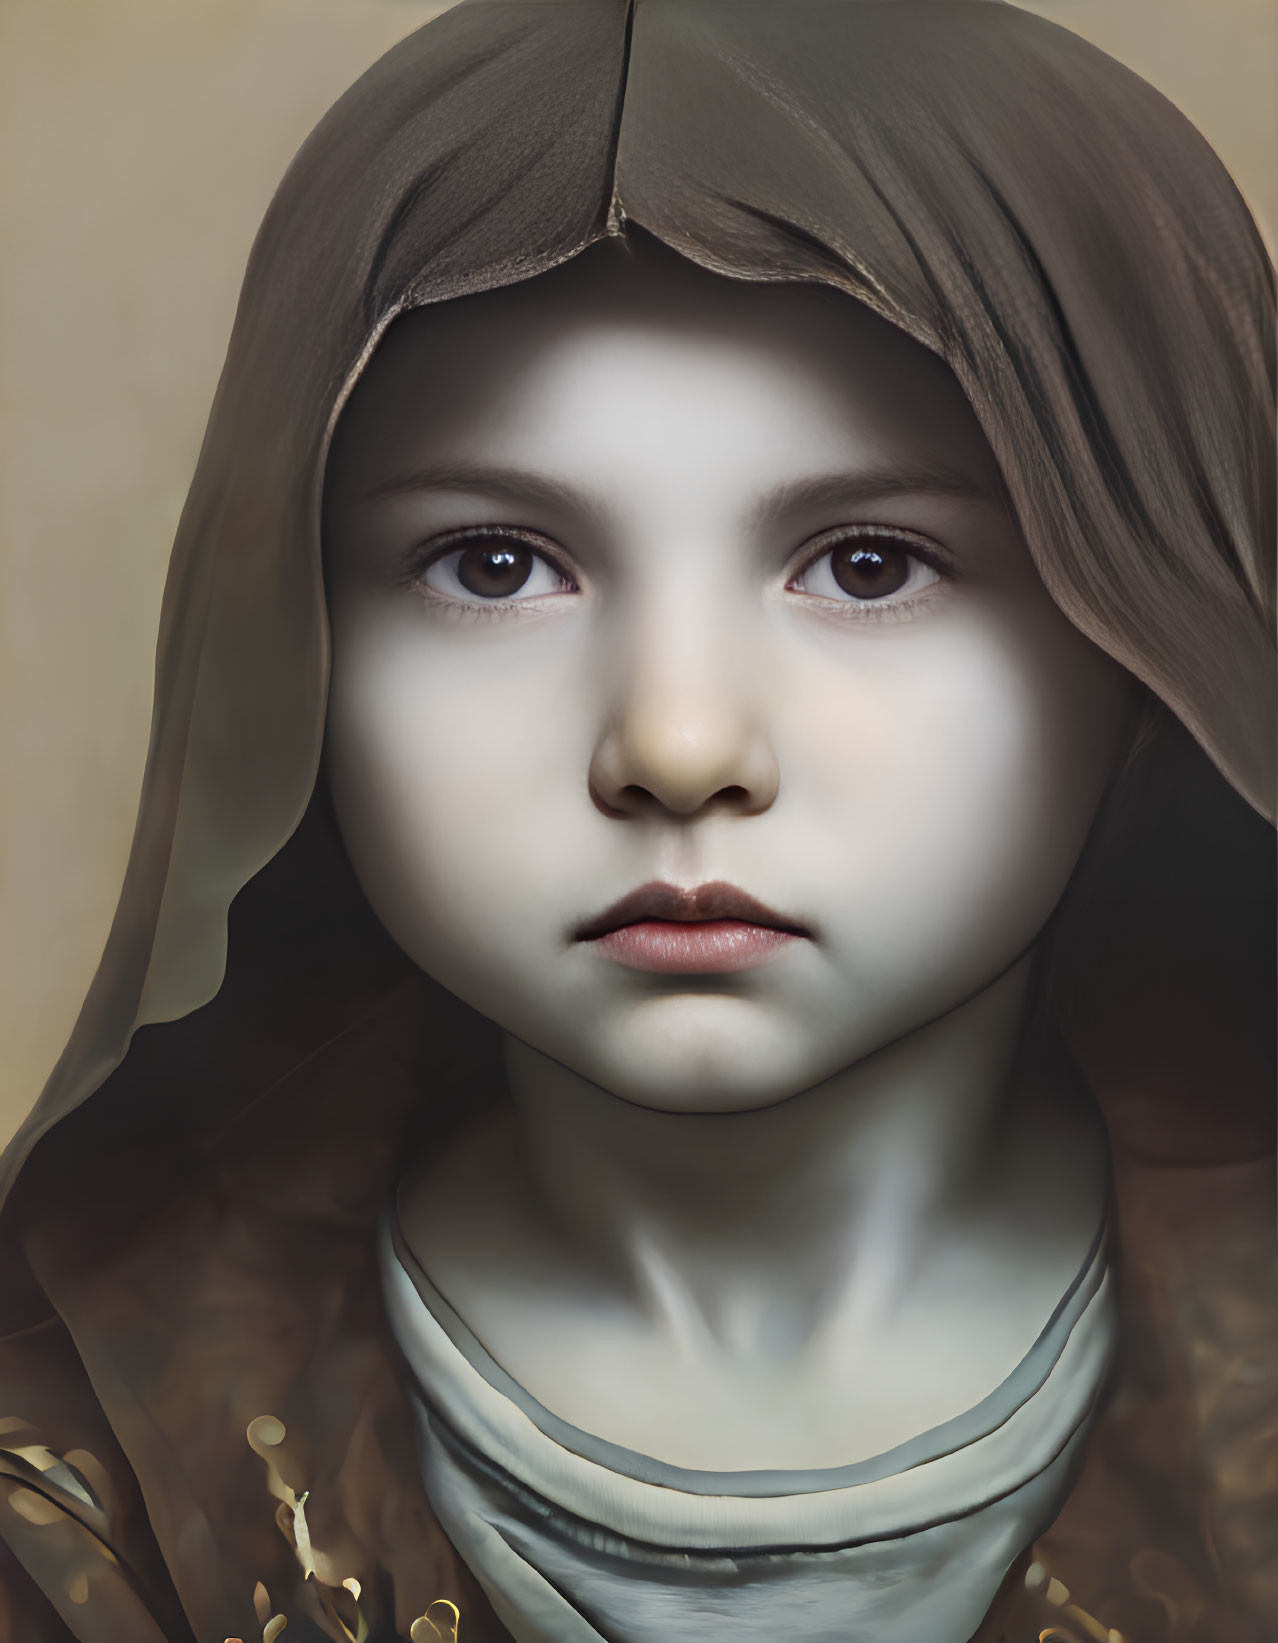 Digital art portrait of young girl with large, expressive eyes and draped head covering.